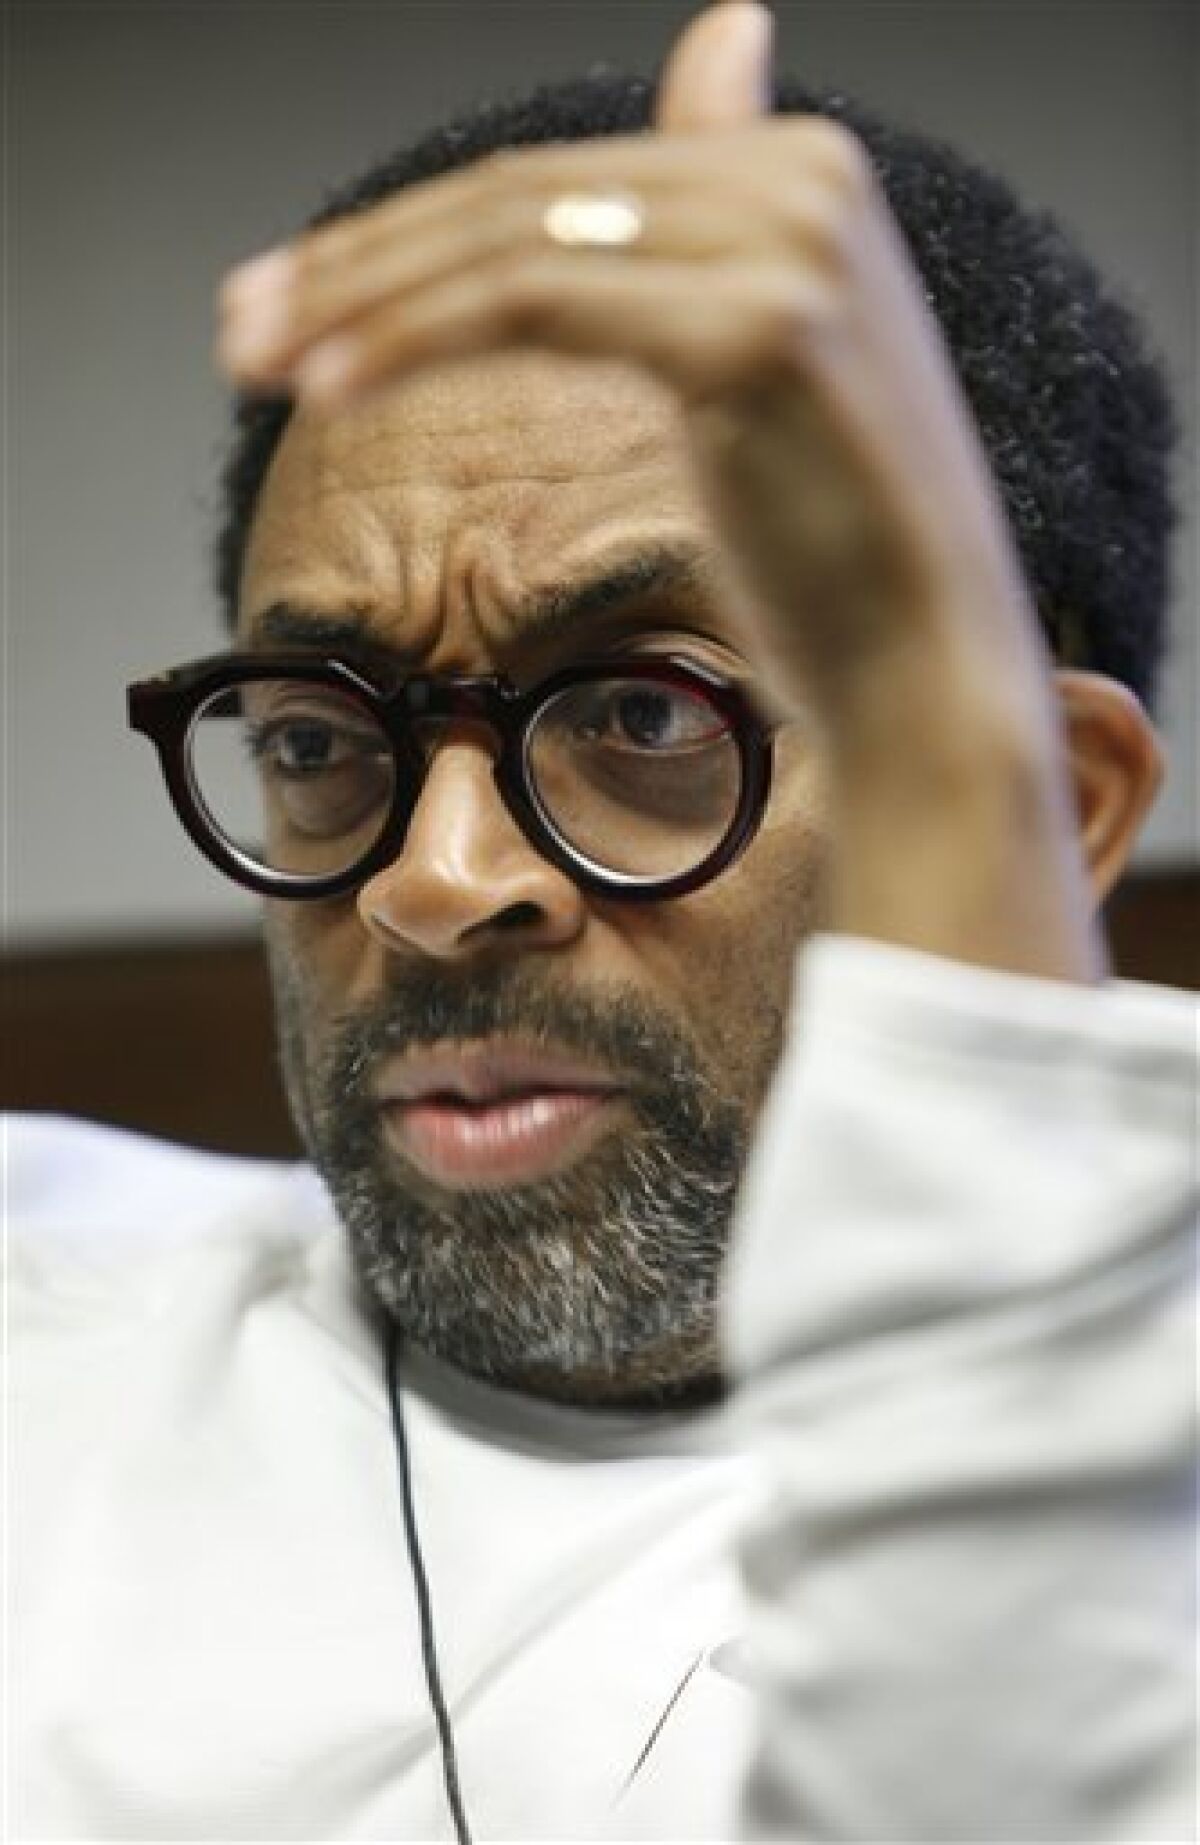 In this June 15, 2009 photo, film director Spike Lee responds during an interview in New York about his 1989 film "Do The Right Thing." (AP Photo/Seth Wenig)